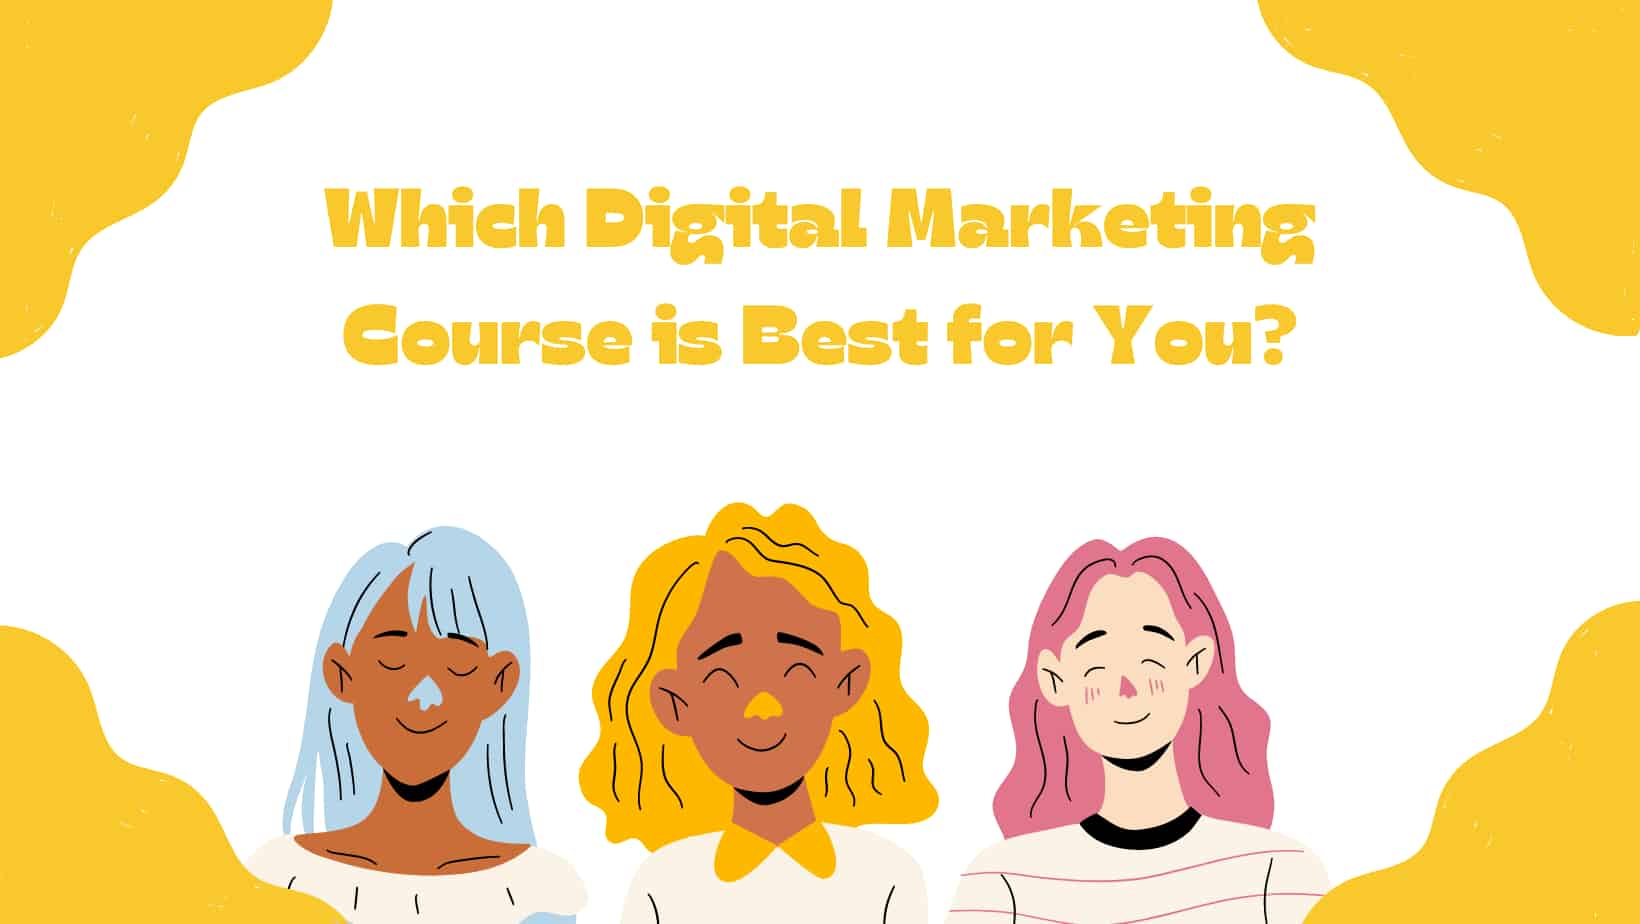 Which Digital Marketing Course is Best for You?